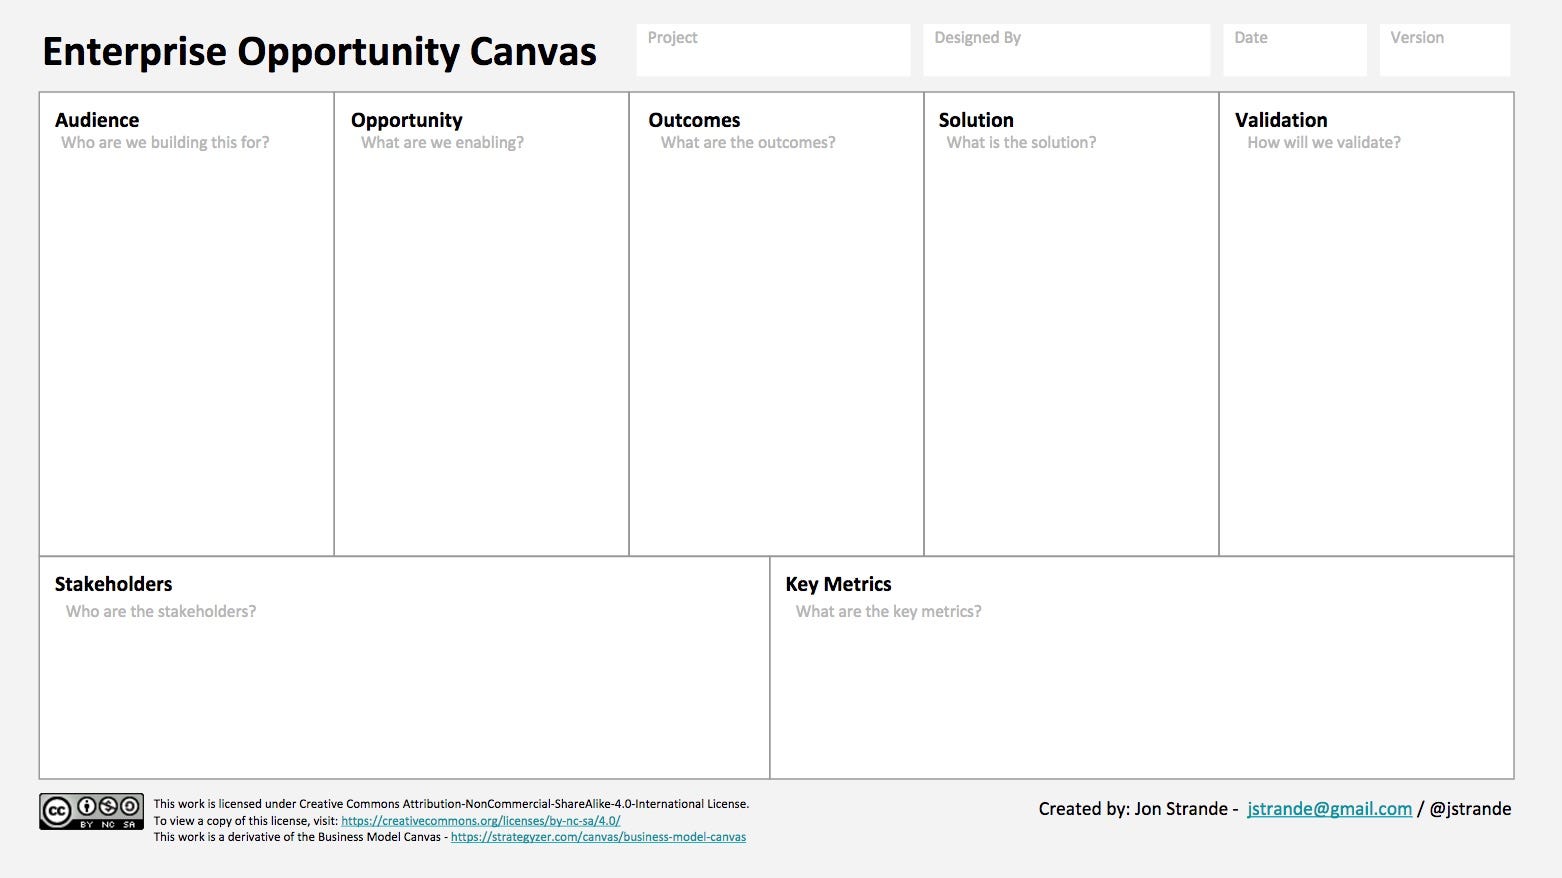 introducing-the-enterprise-opportunity-canvas-by-jstrande-medium